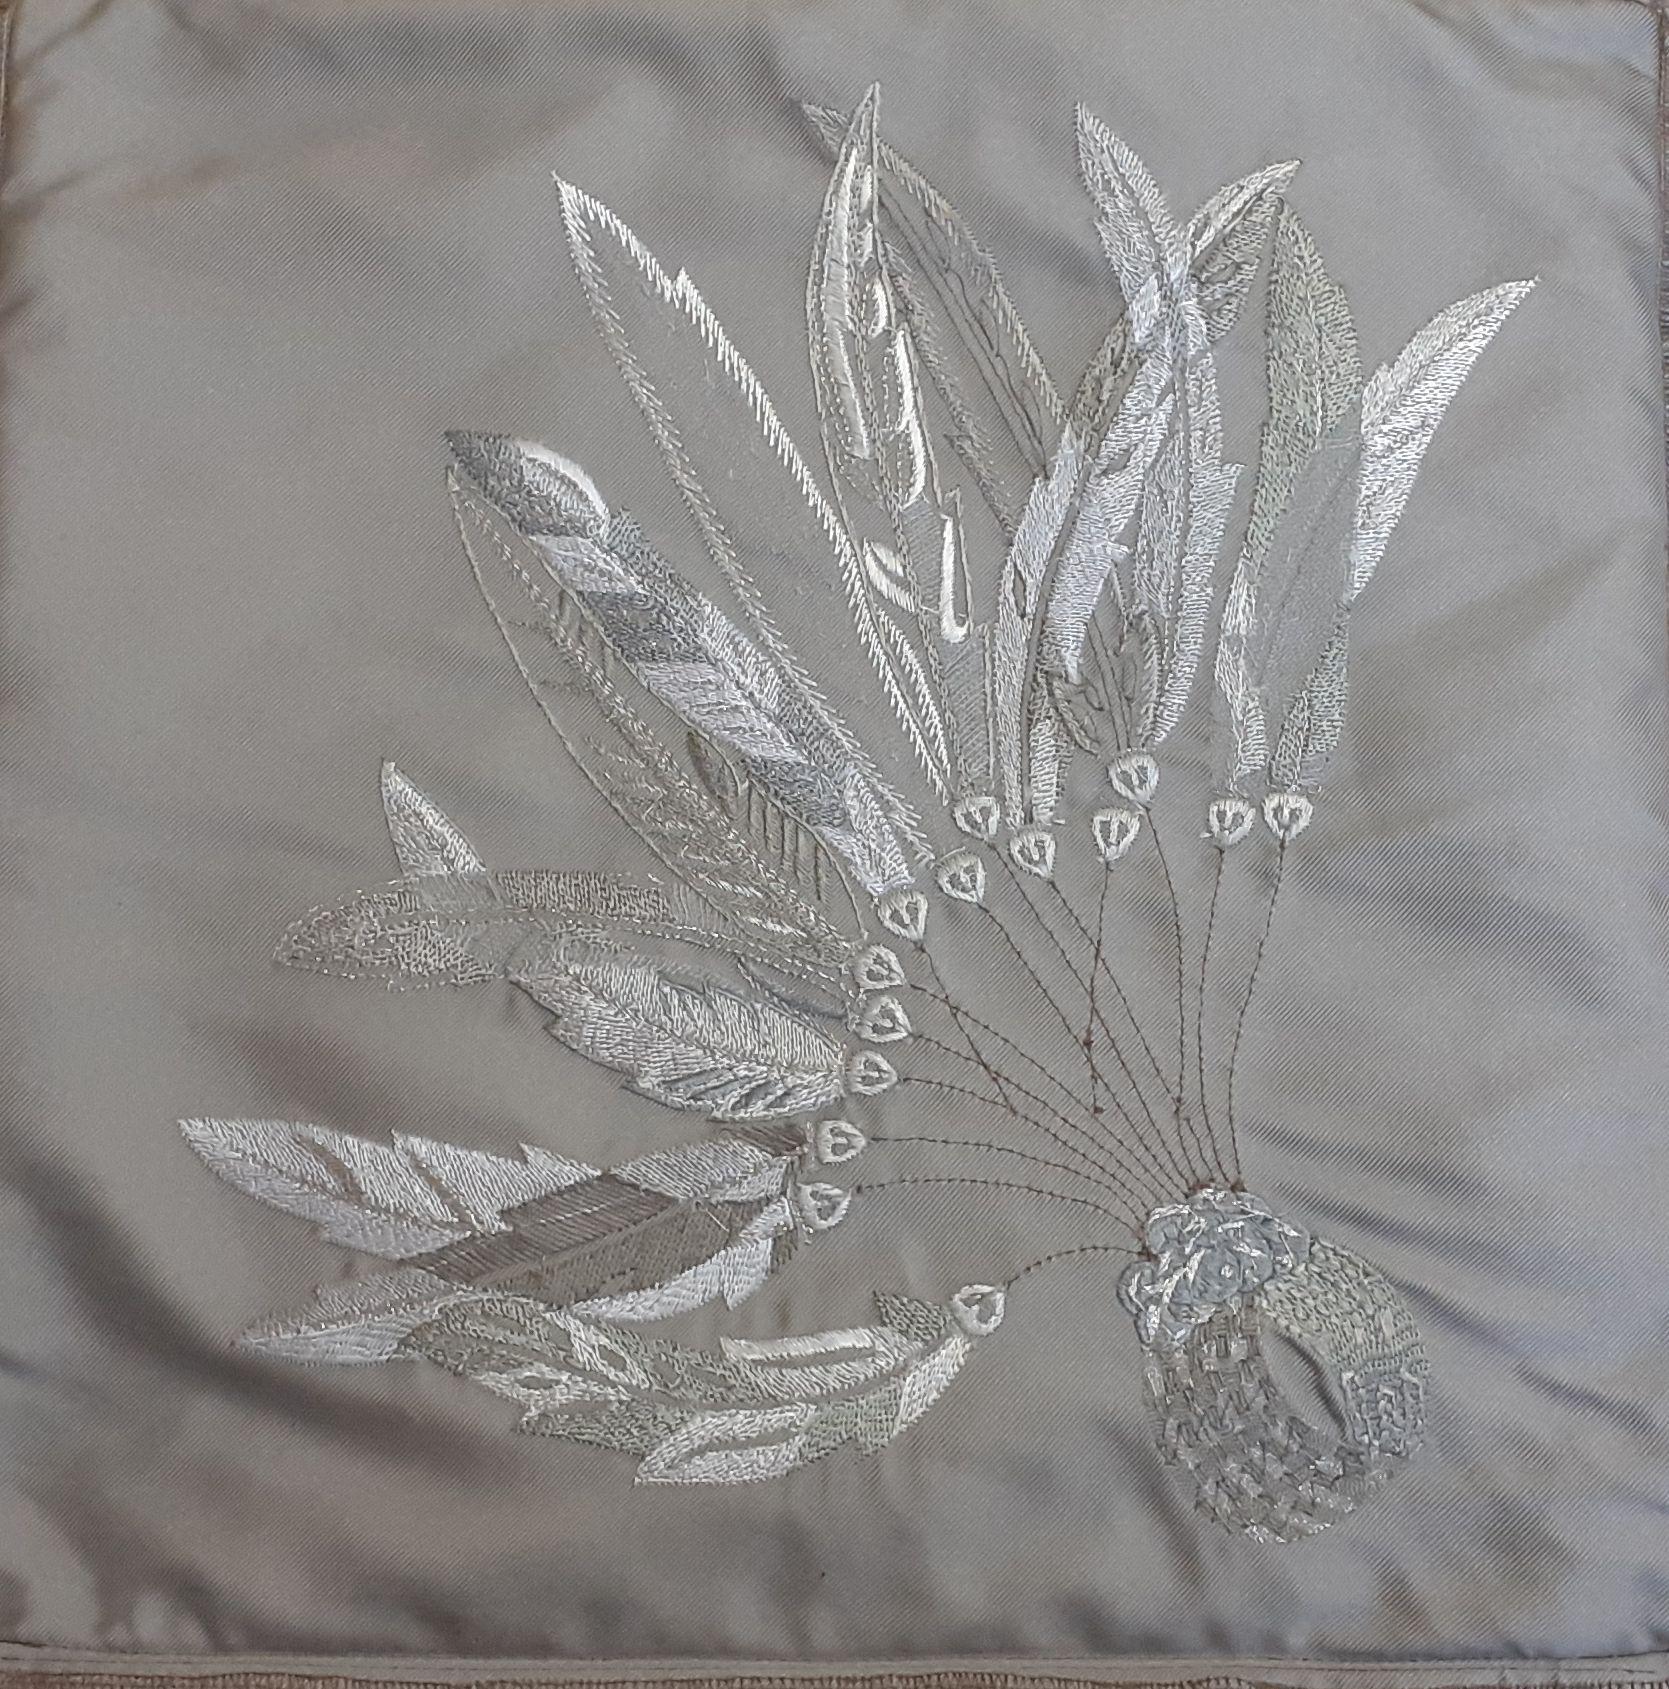 Exceptional Hermès Cushion Pillow Brazil Feathers Pattern Silk Coton Embroidered For Sale 6